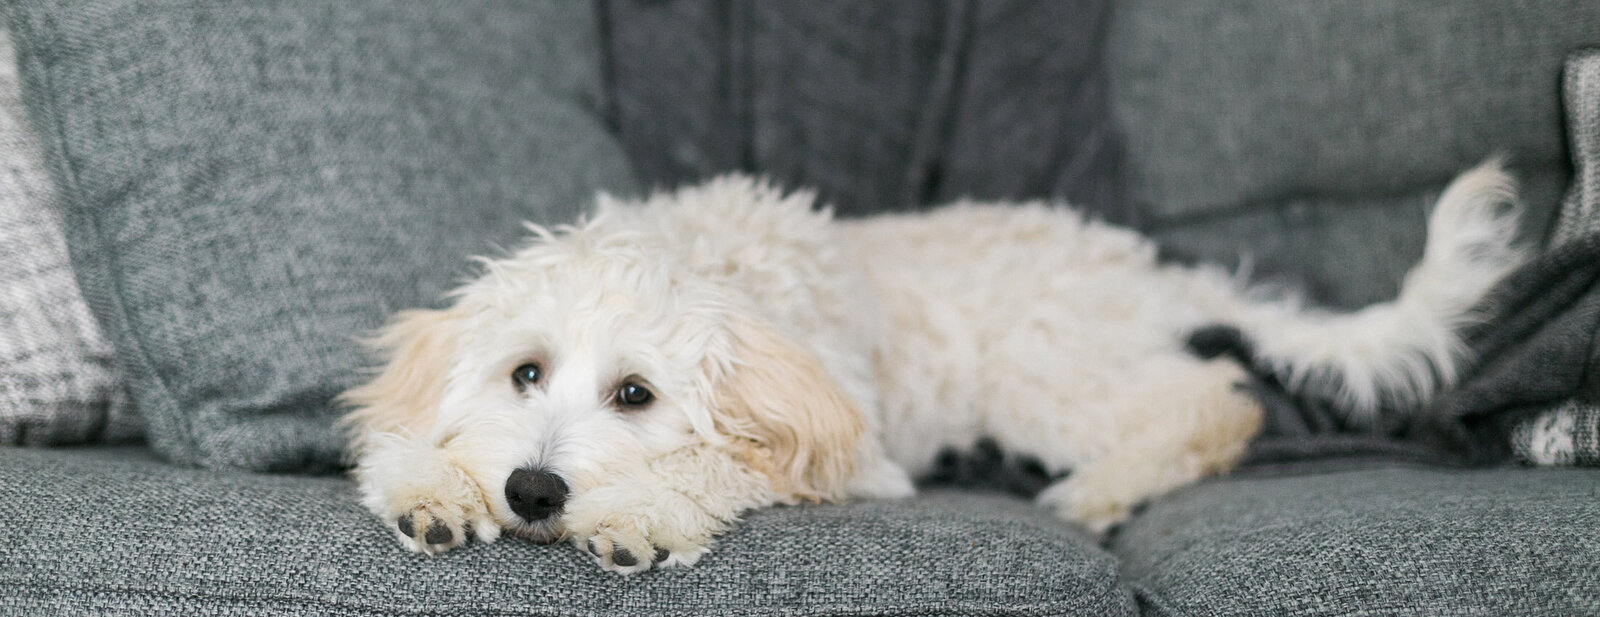 goldendoodle puppy, photo by My Brand Photographer